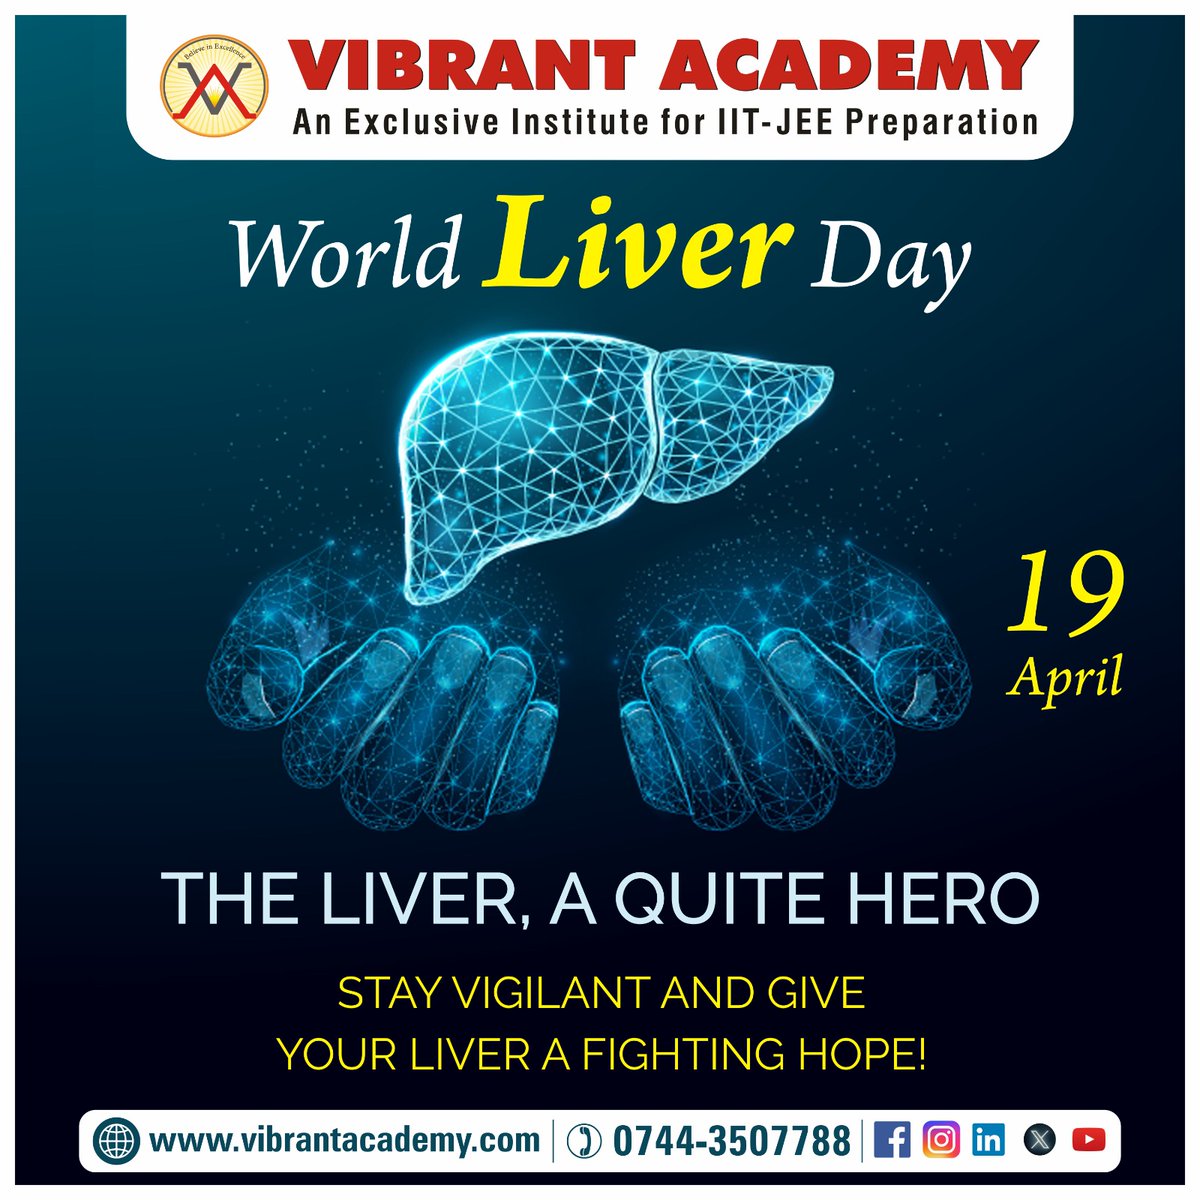 This World Liver Day we urges you to take steps towards a healthier you! Eat well, drink healthy, and let's raise awareness about liver health together.

 #WorldLiverDay #vibrantacademy #kotacoaching #iitjee #jeemains #JEEAdvanced #iitjeepreparation